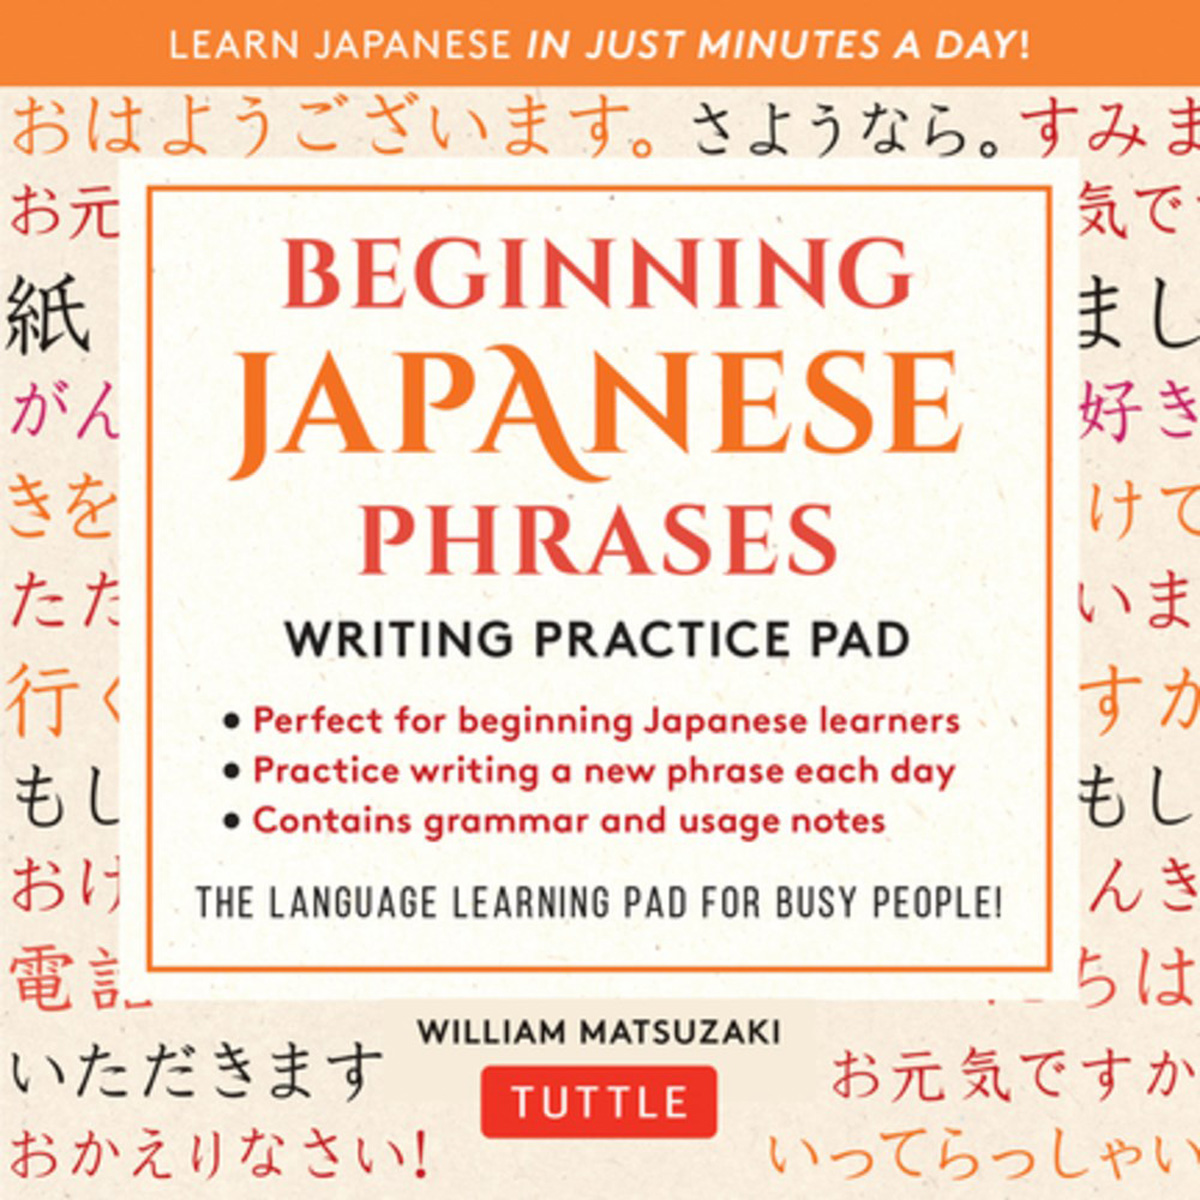 Beginning Japanese Phrases Writing Practice Pad image count 0